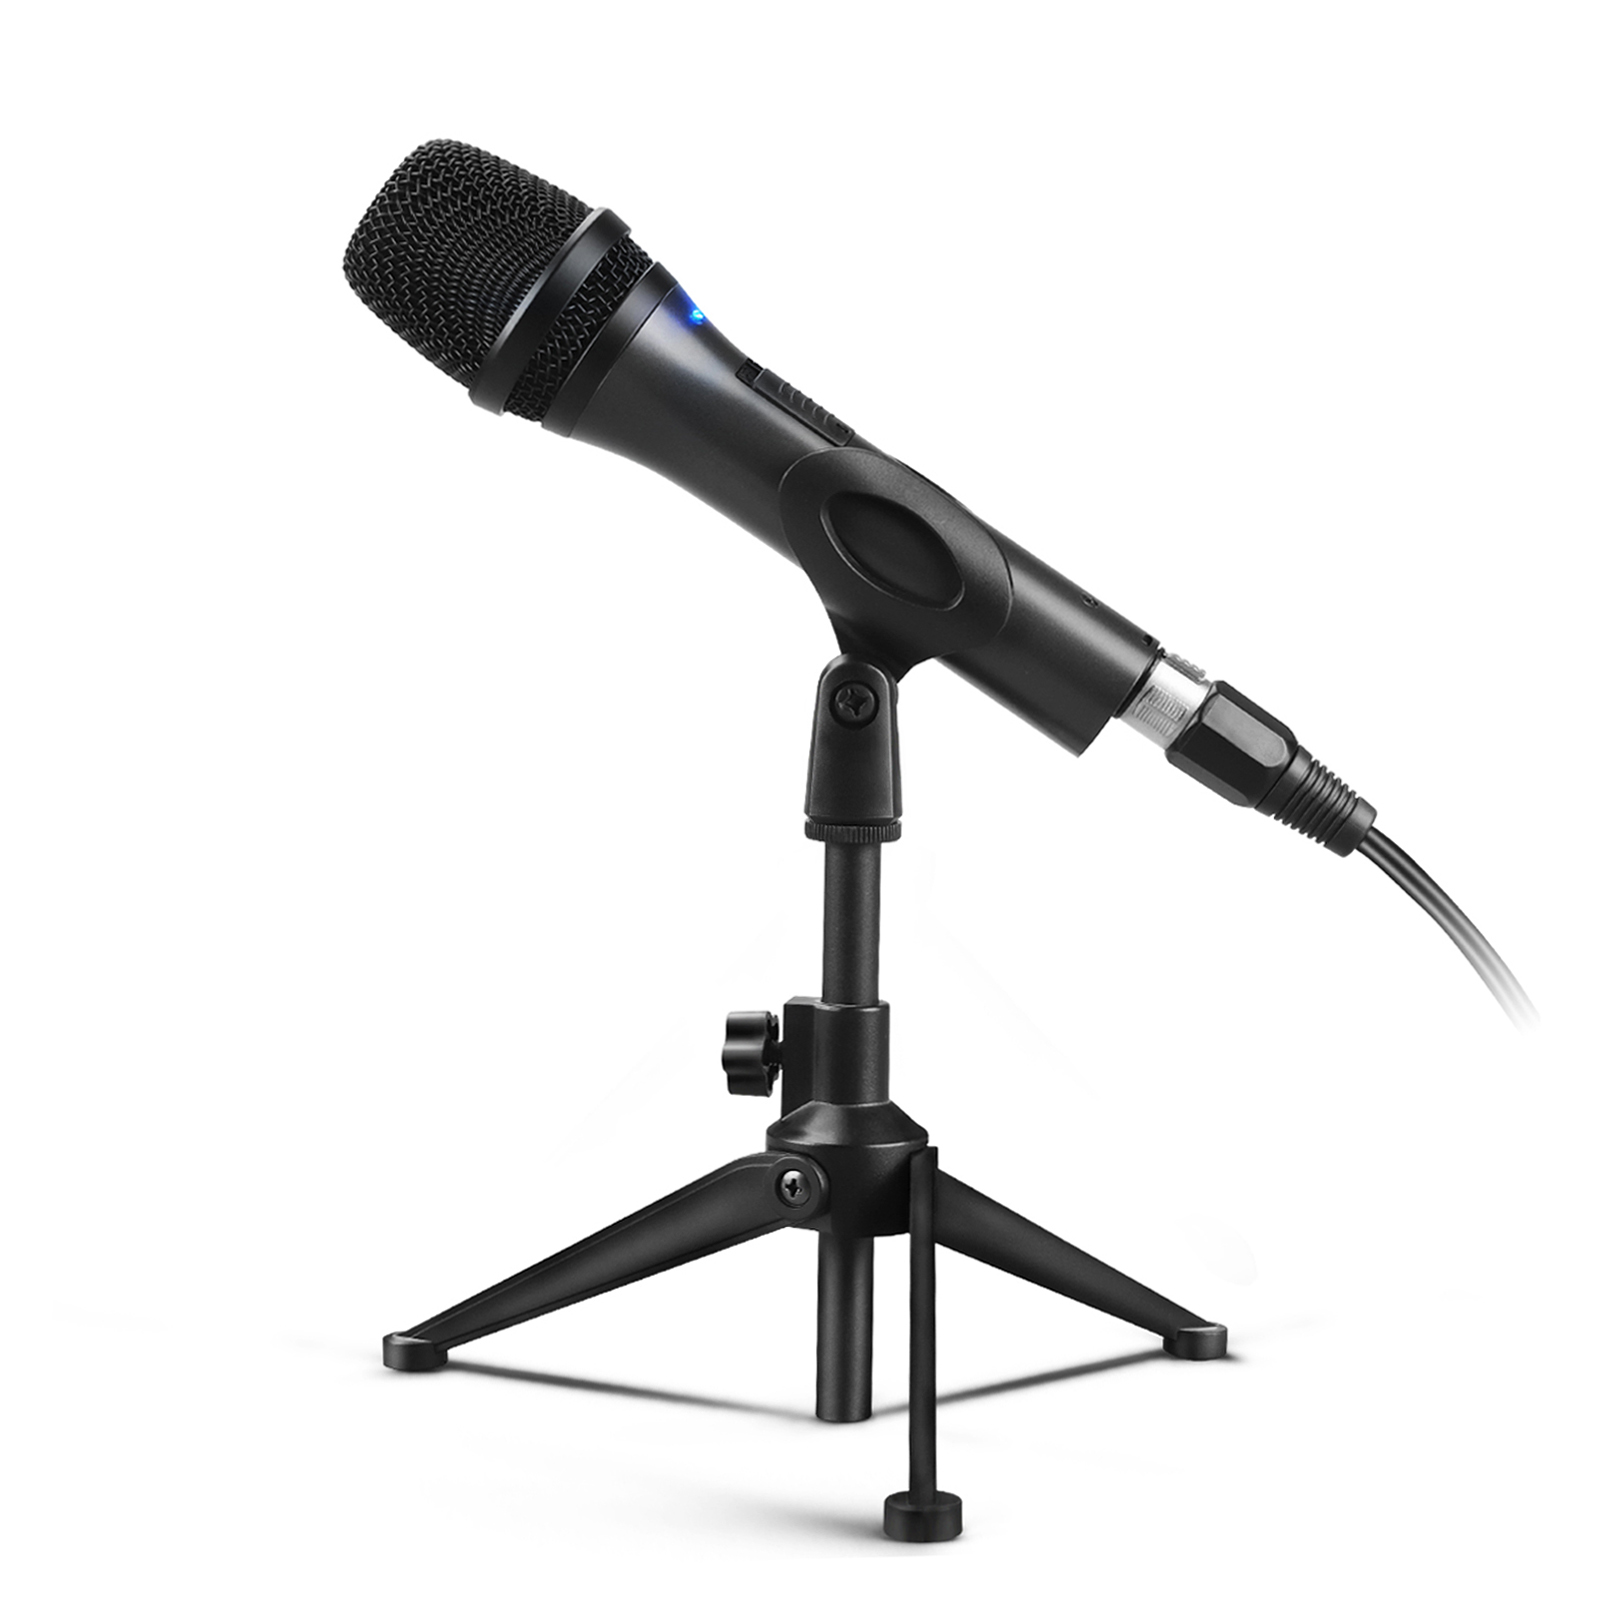 DTR2100X Wired live broadcast microphone for mobile phone PC recording karaoke